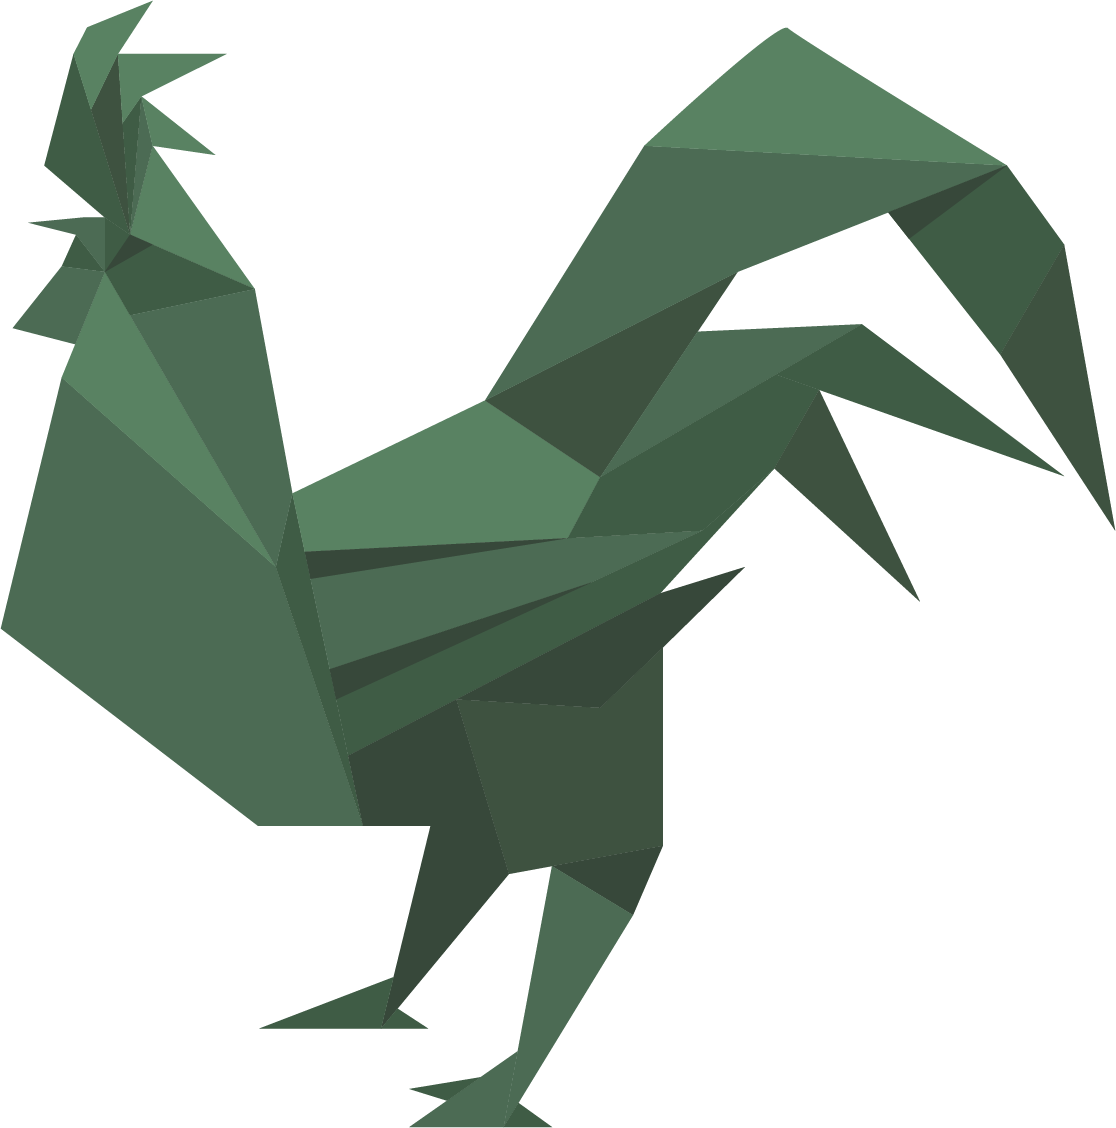 Green Origami Rooster Illustration PNG image